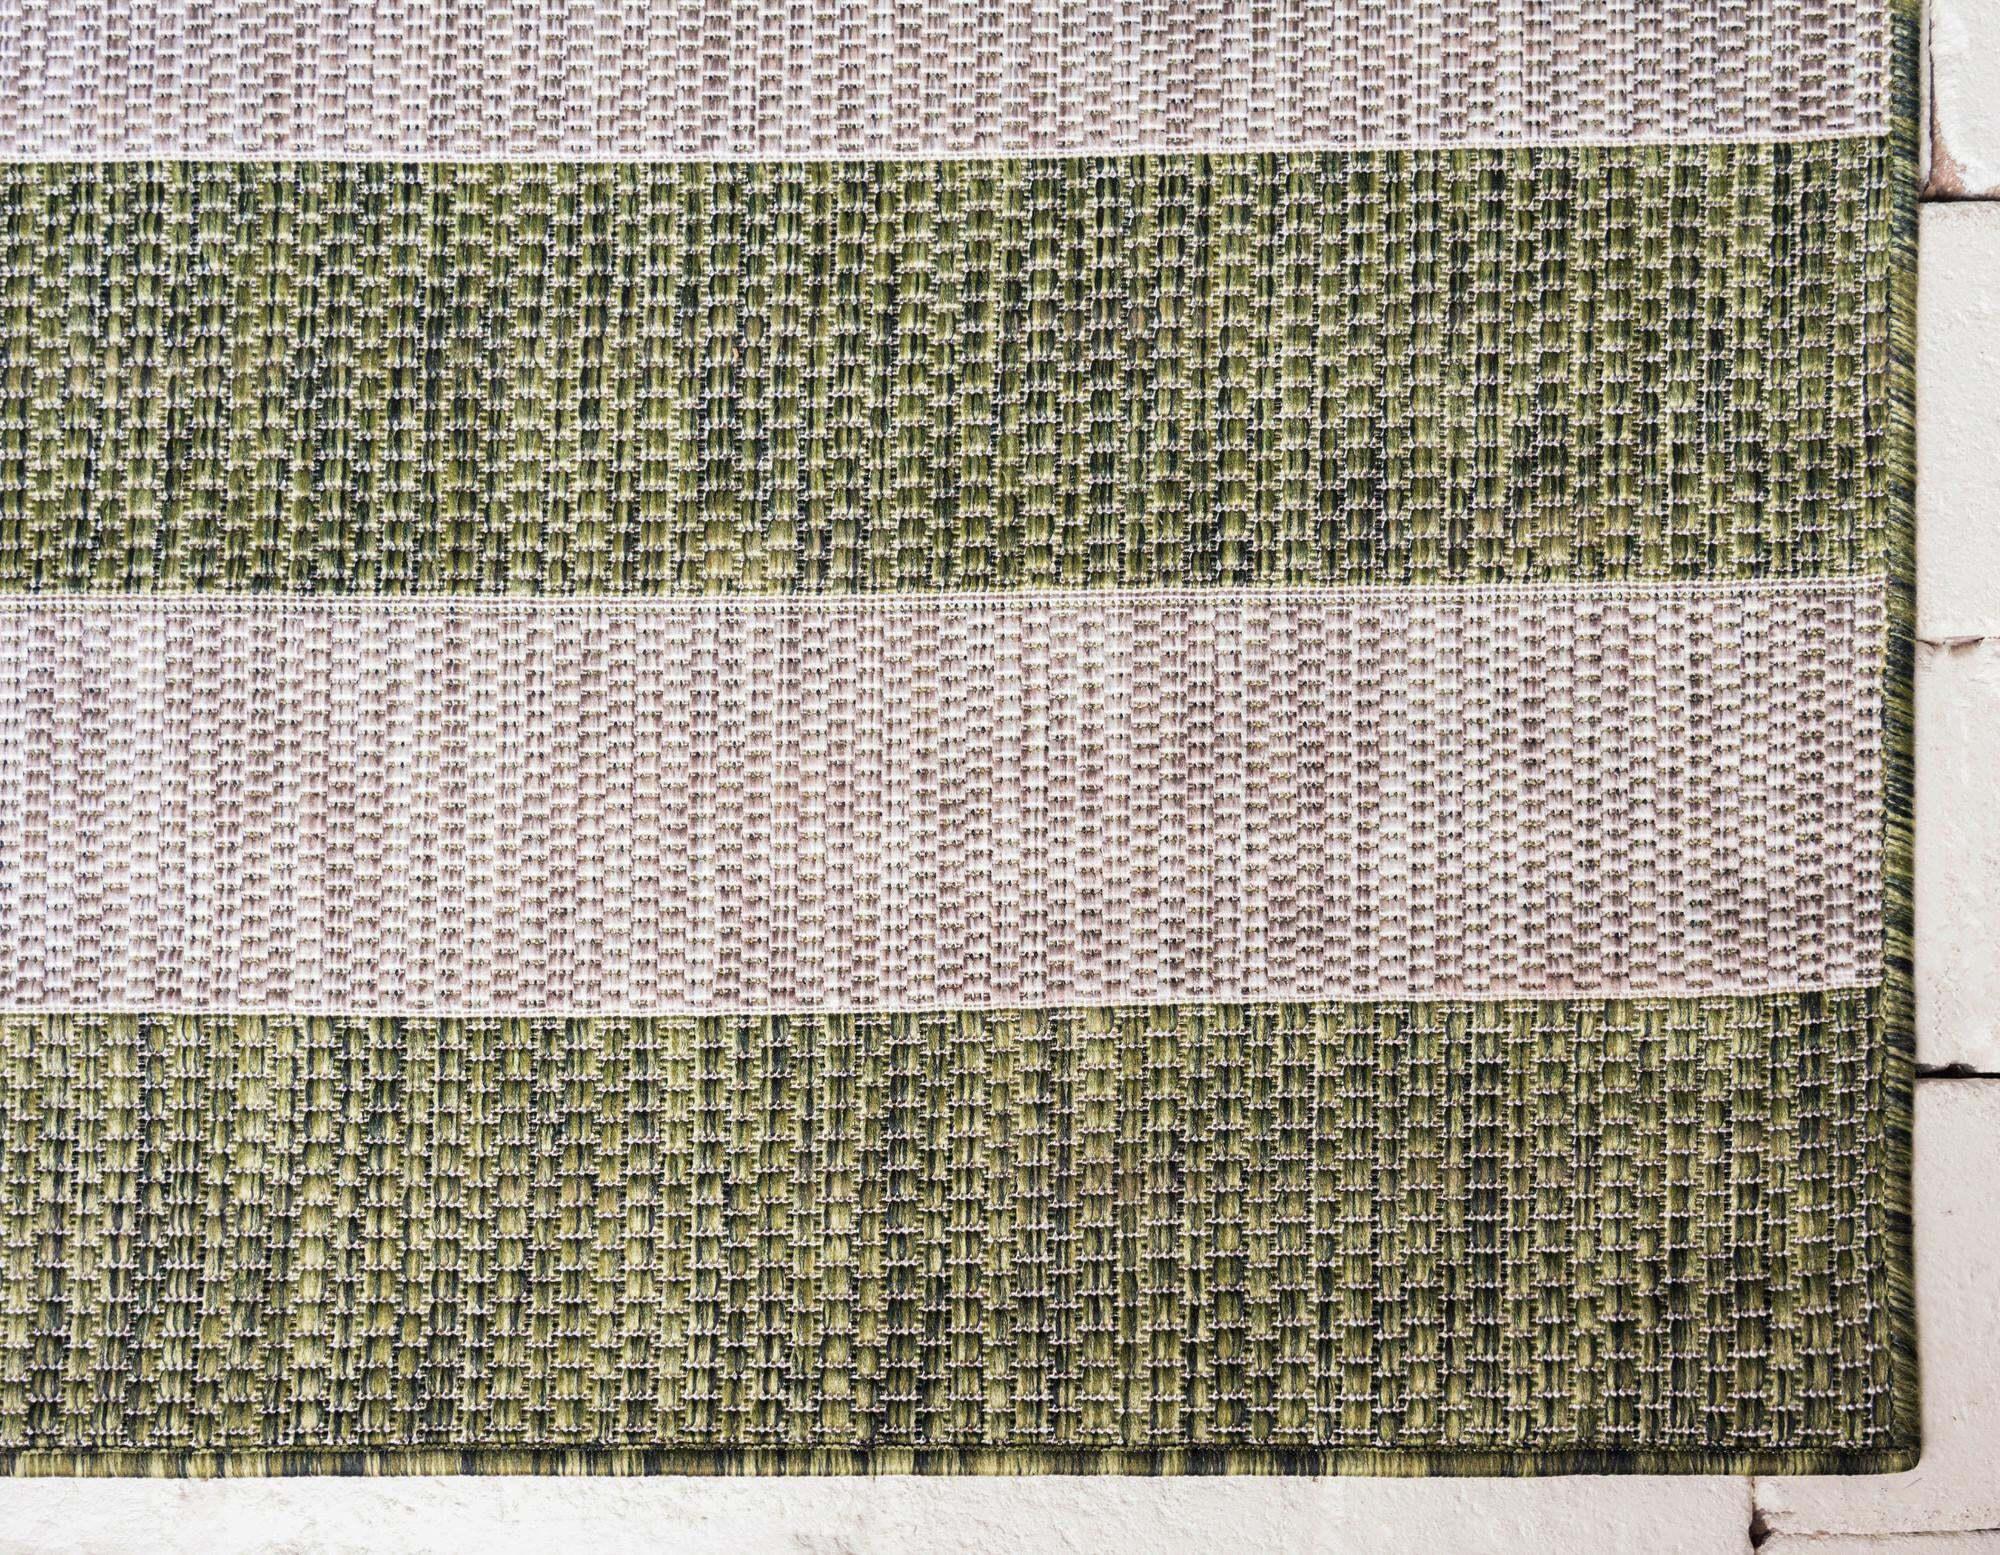 Unique Loom Outdoor Rugs - Outdoor Striped Striped Rectangular 8x11 Rug Green & Ivory